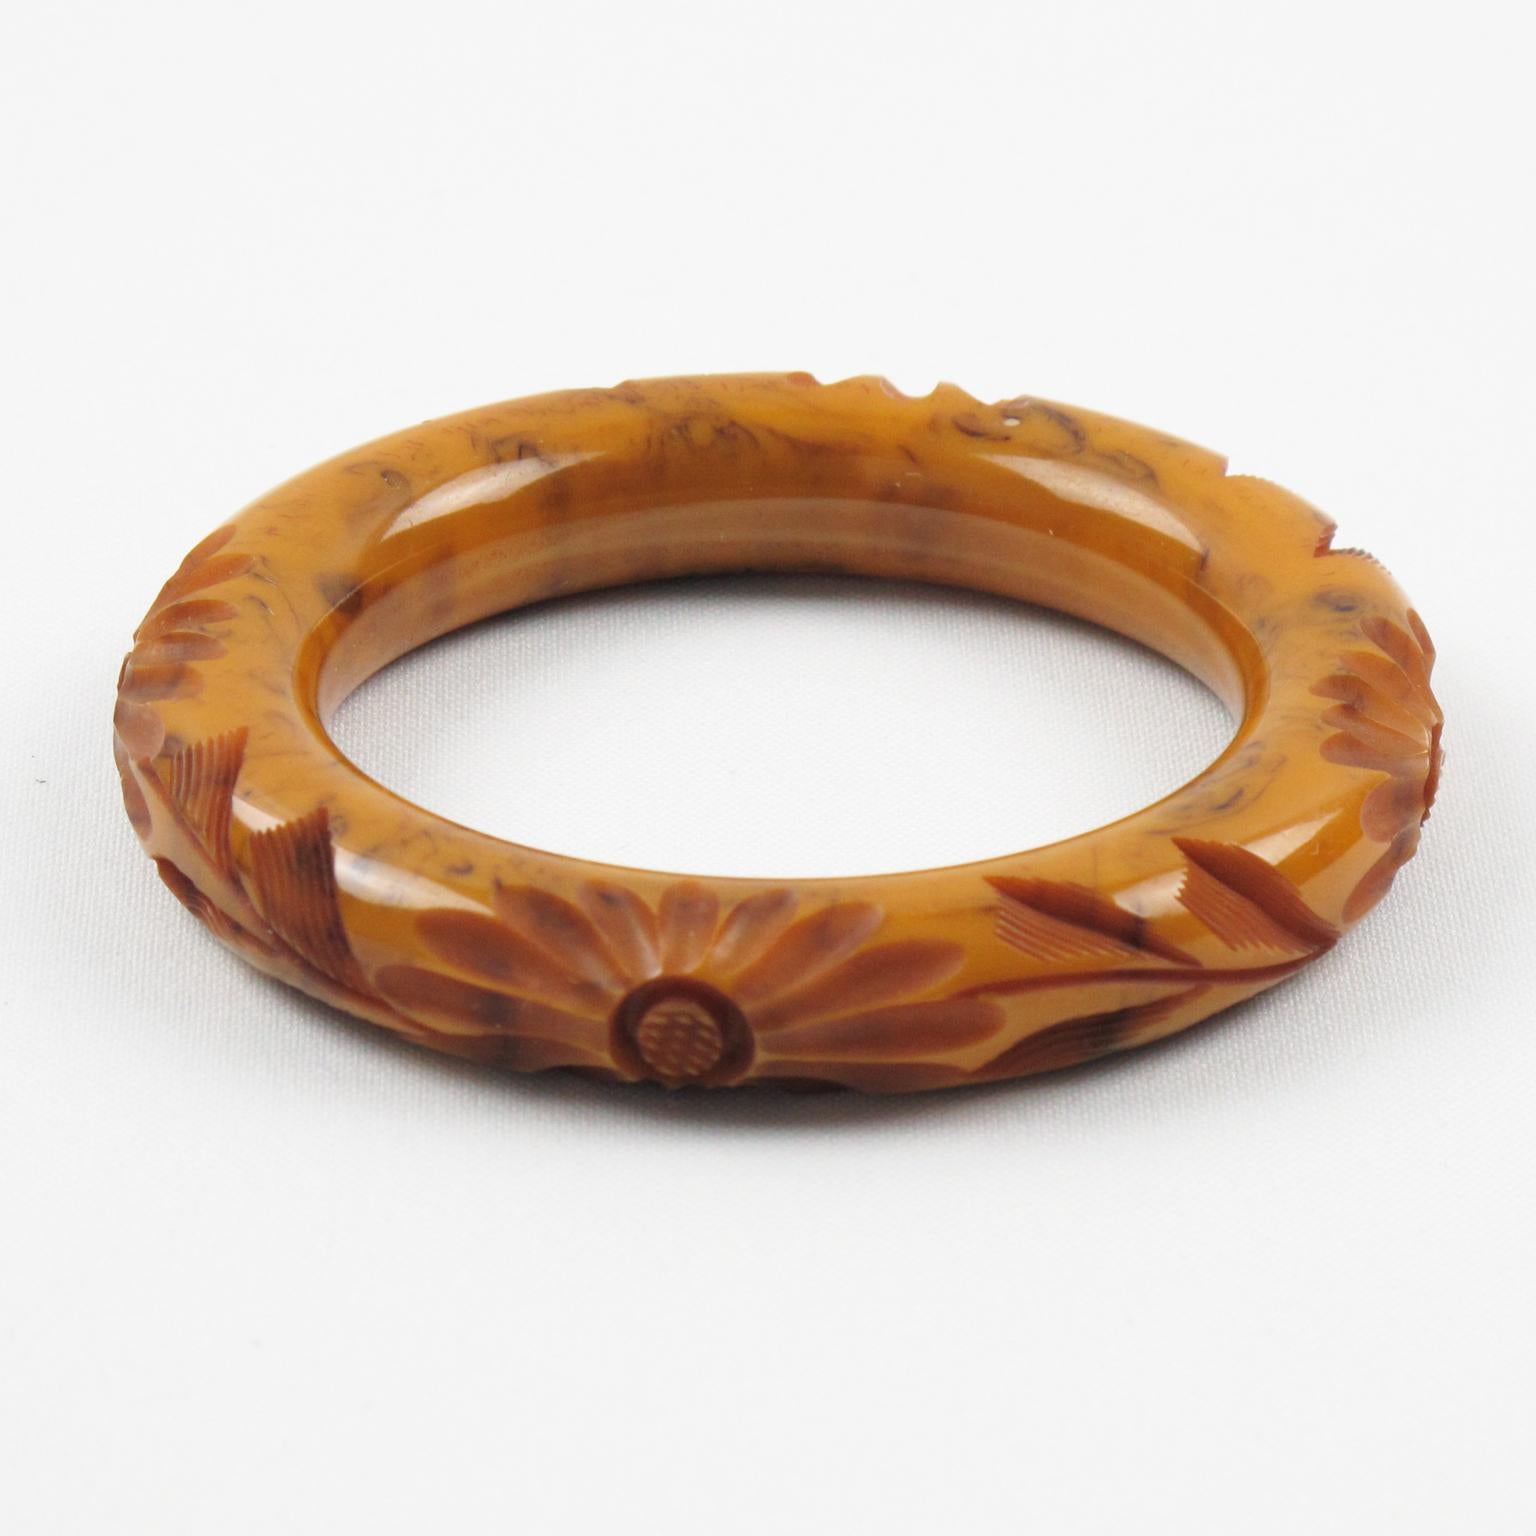 This stunning apple cider and black marble Bakelite bracelet bangle has a chunky, rounded domed shape with deep floral carving around it. The piece boasts an intense golden orange cider marble color with black cloudy swirling.
Measurements: Inside